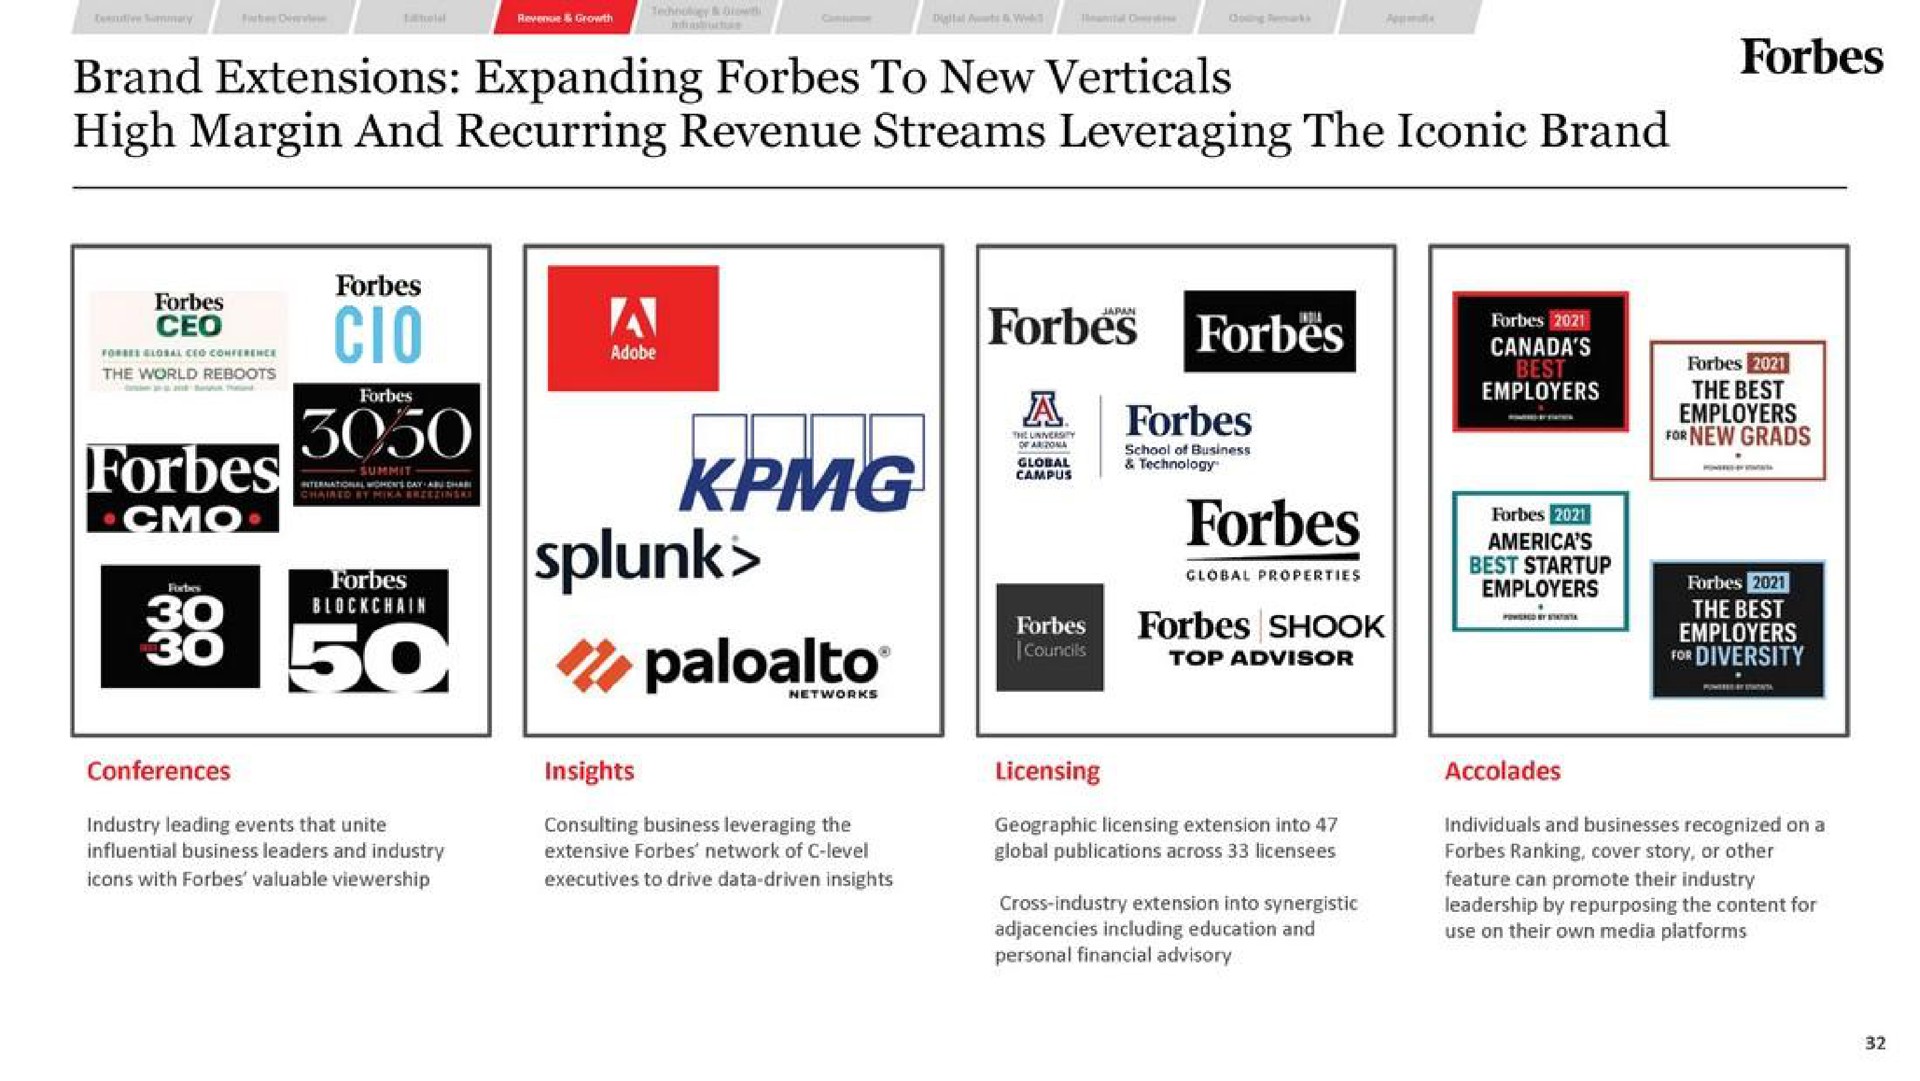 brand extensions expanding to new verticals high margin and recurring revenue streams leveraging the iconic brand | Forbes